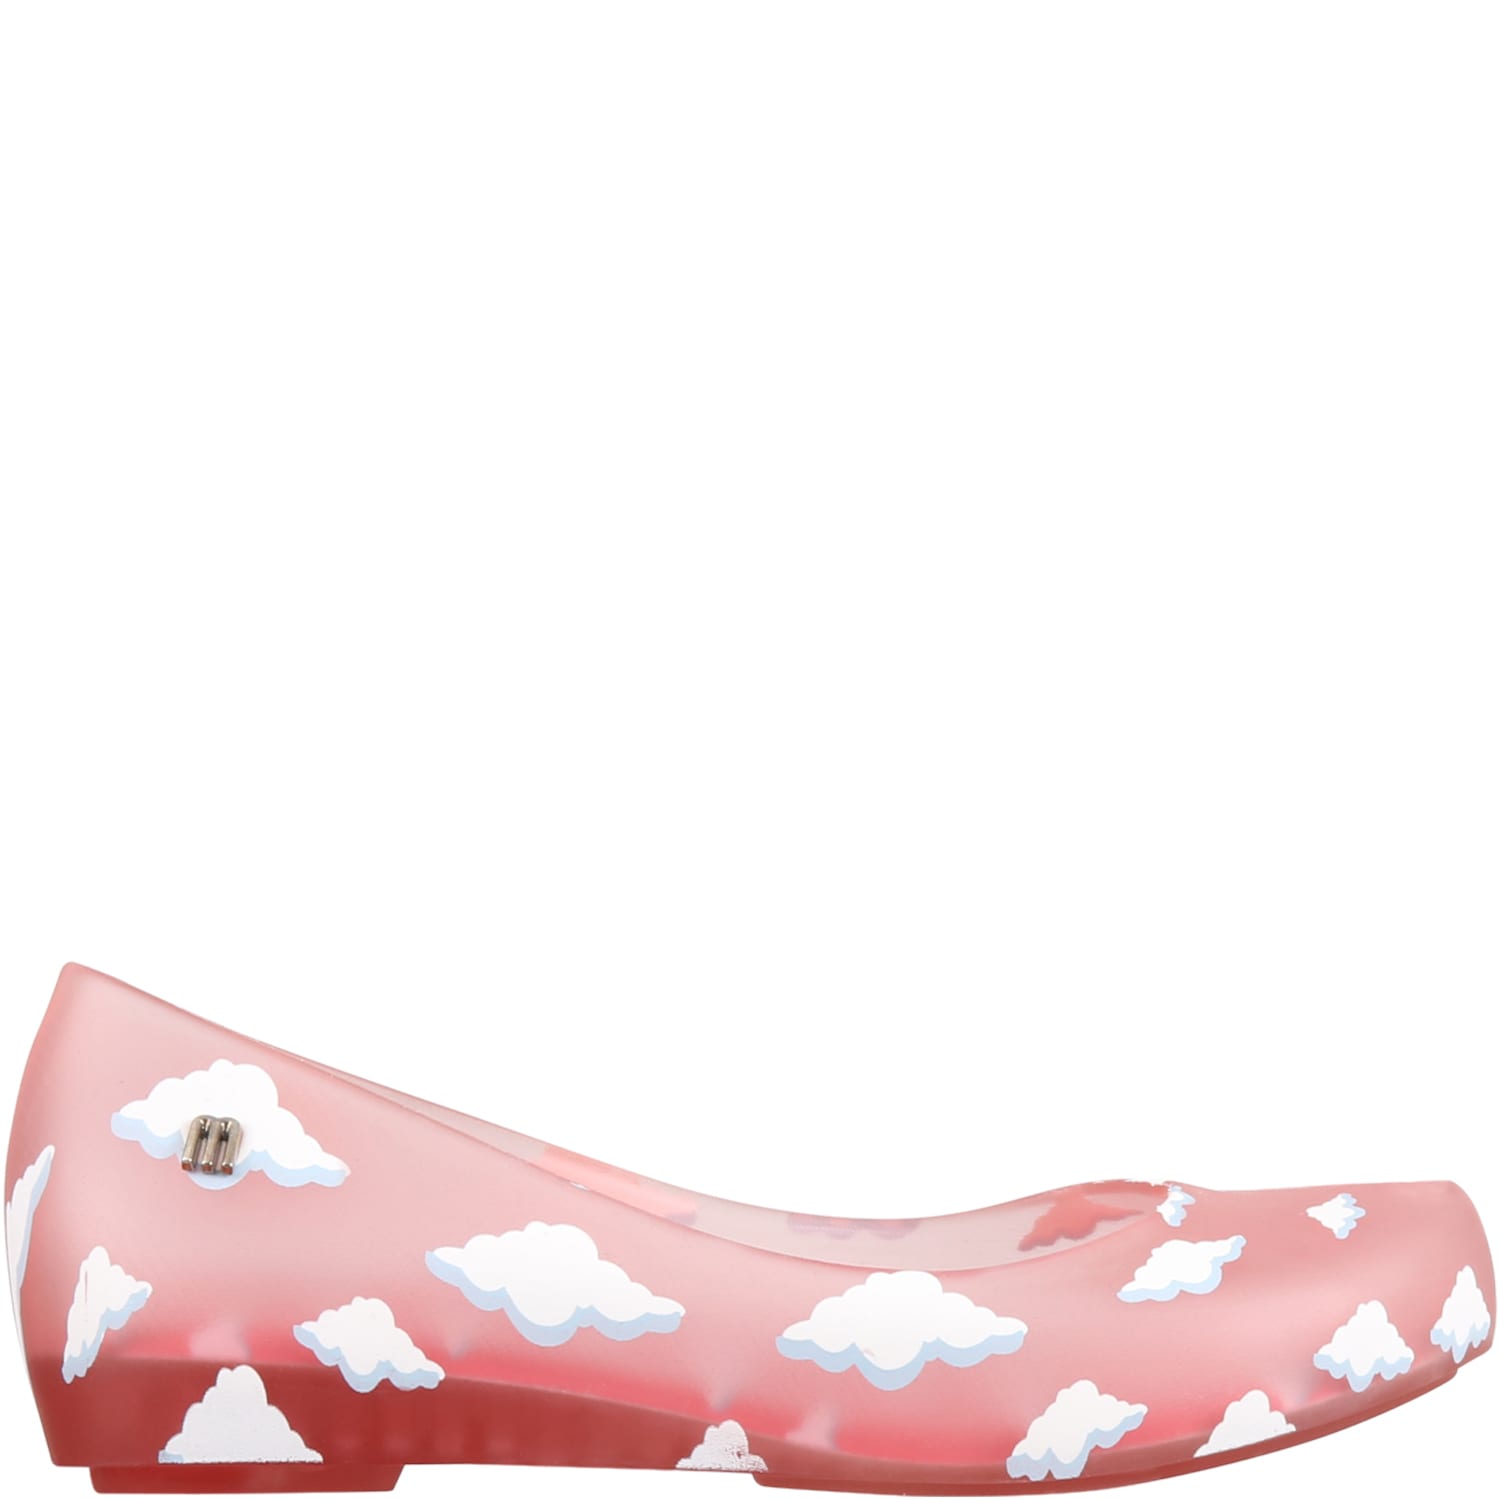 Melissa Pink Ballerina Flats For Girl With Clouds